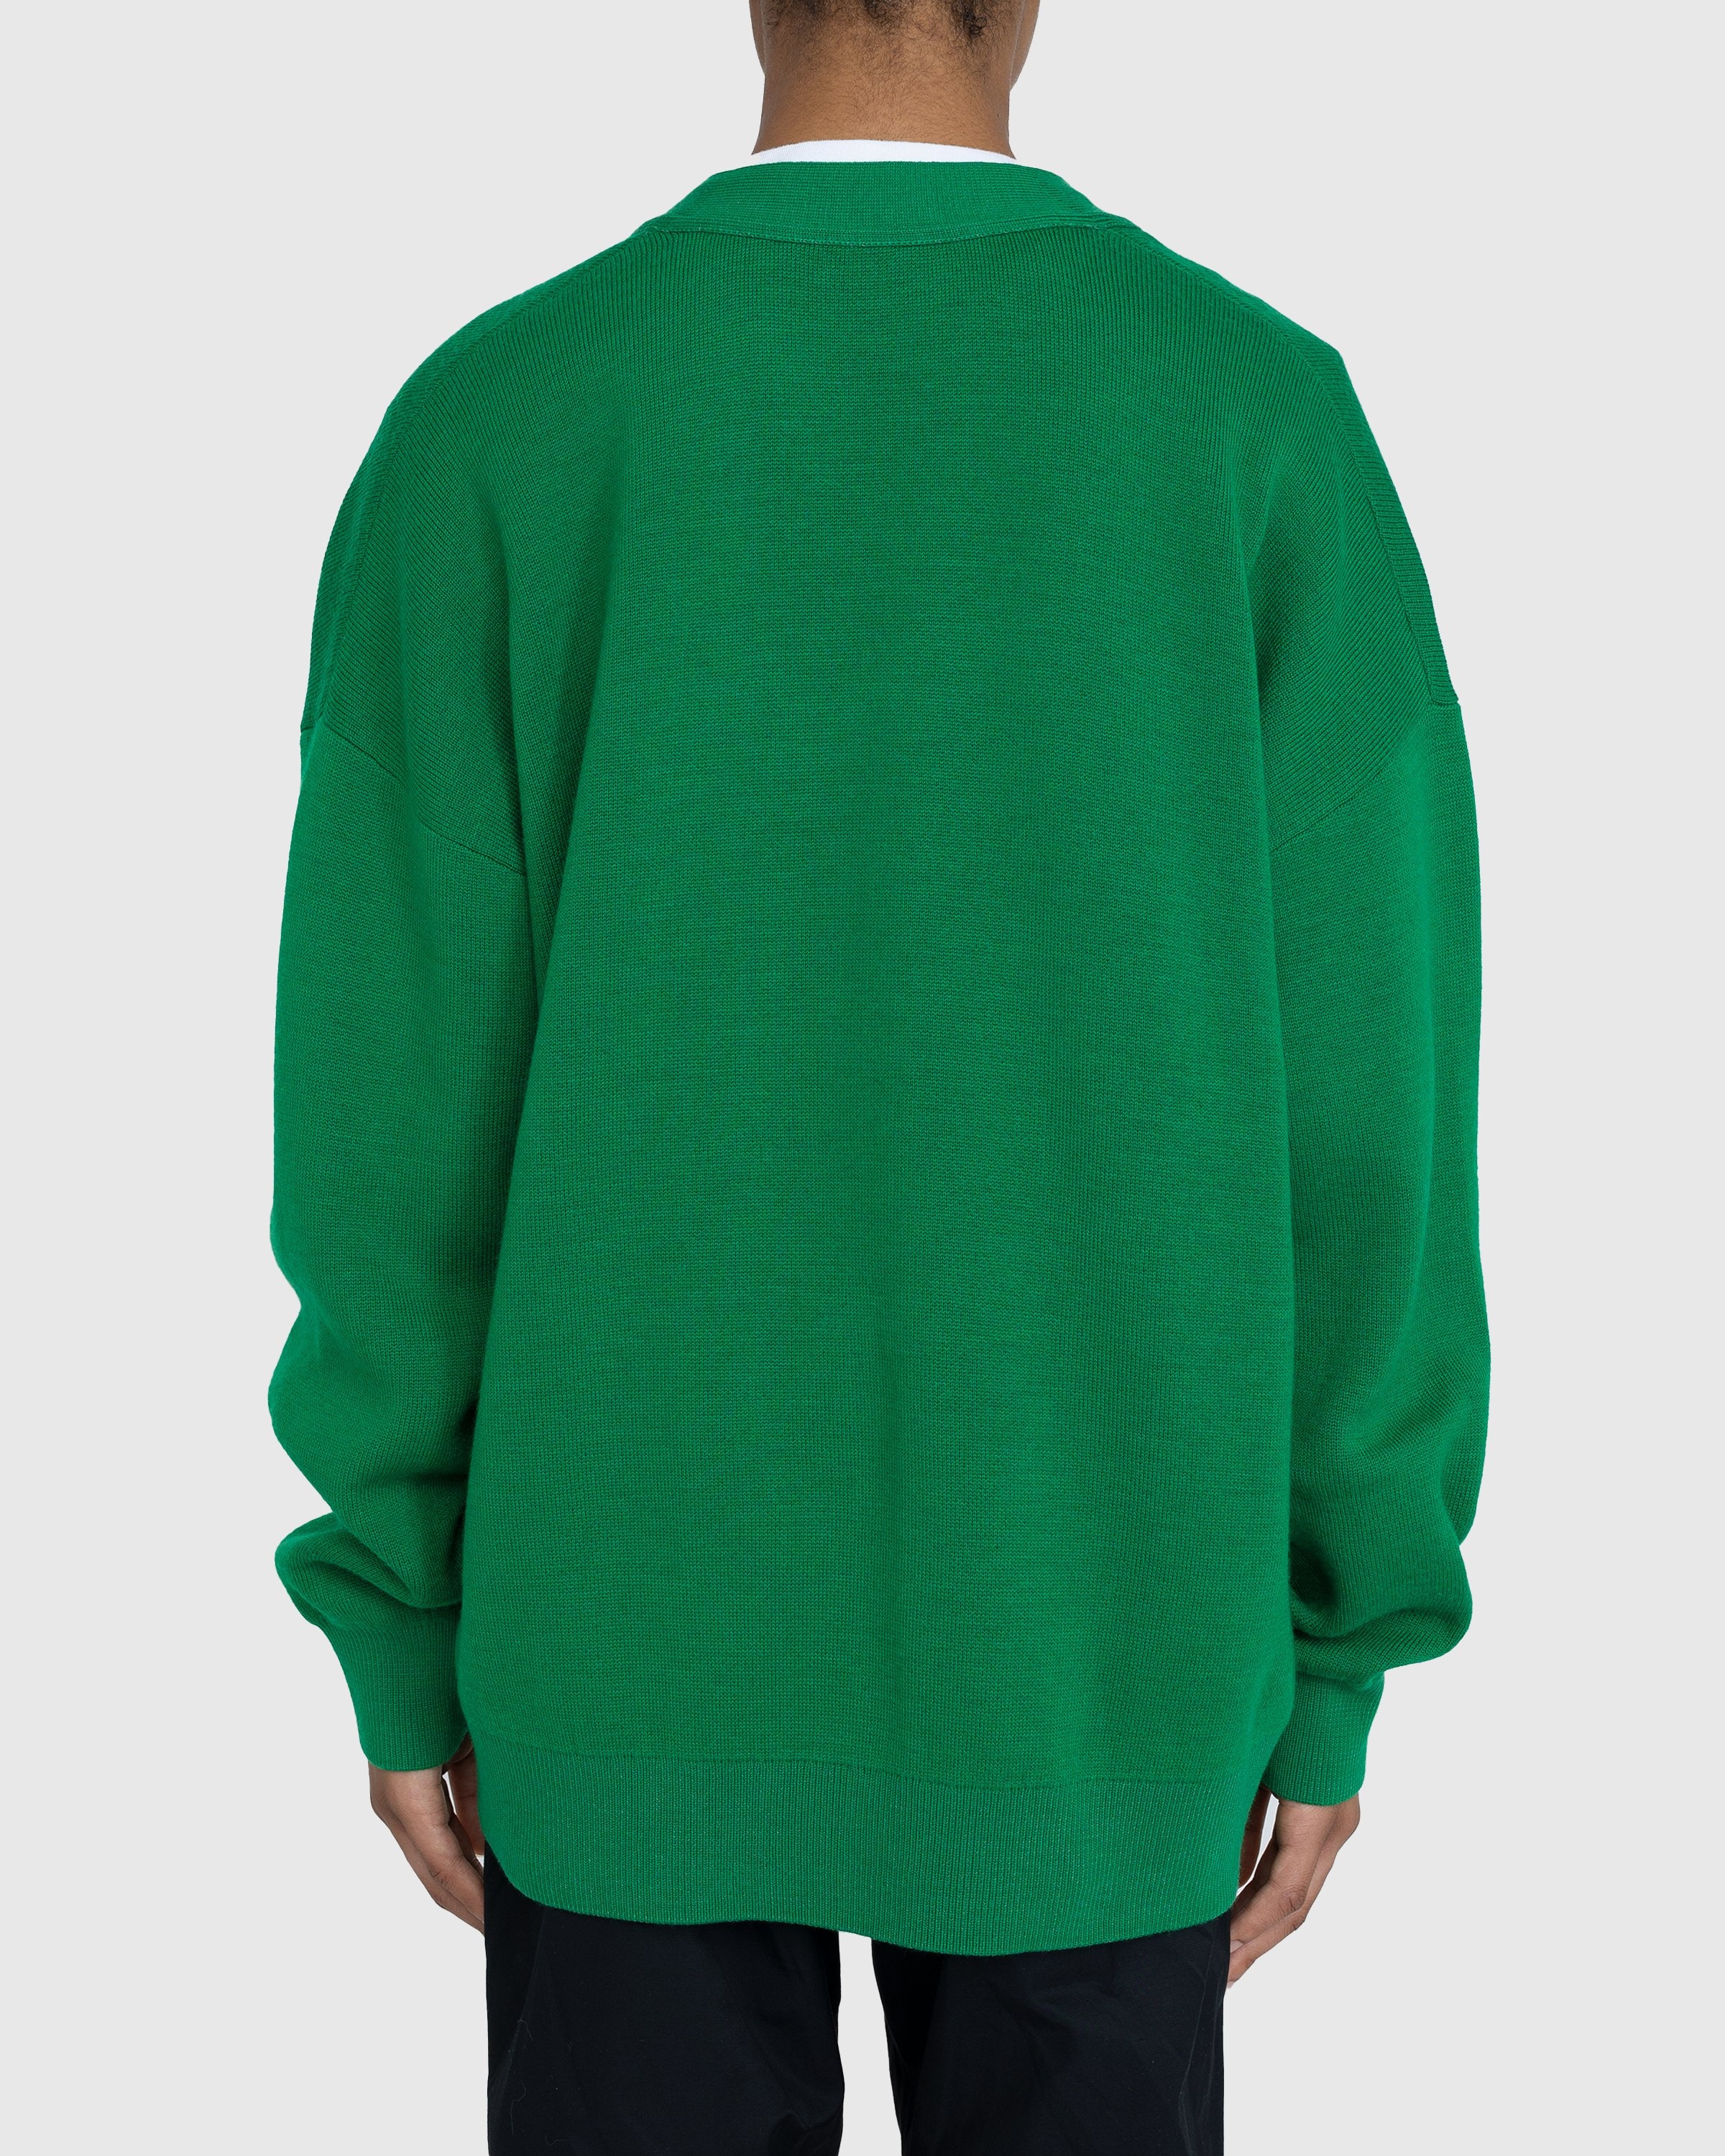 Acne Studios – Wool Blend V-Neck Cardigan Sweater Electric Green - Cardigans - Green - Image 4